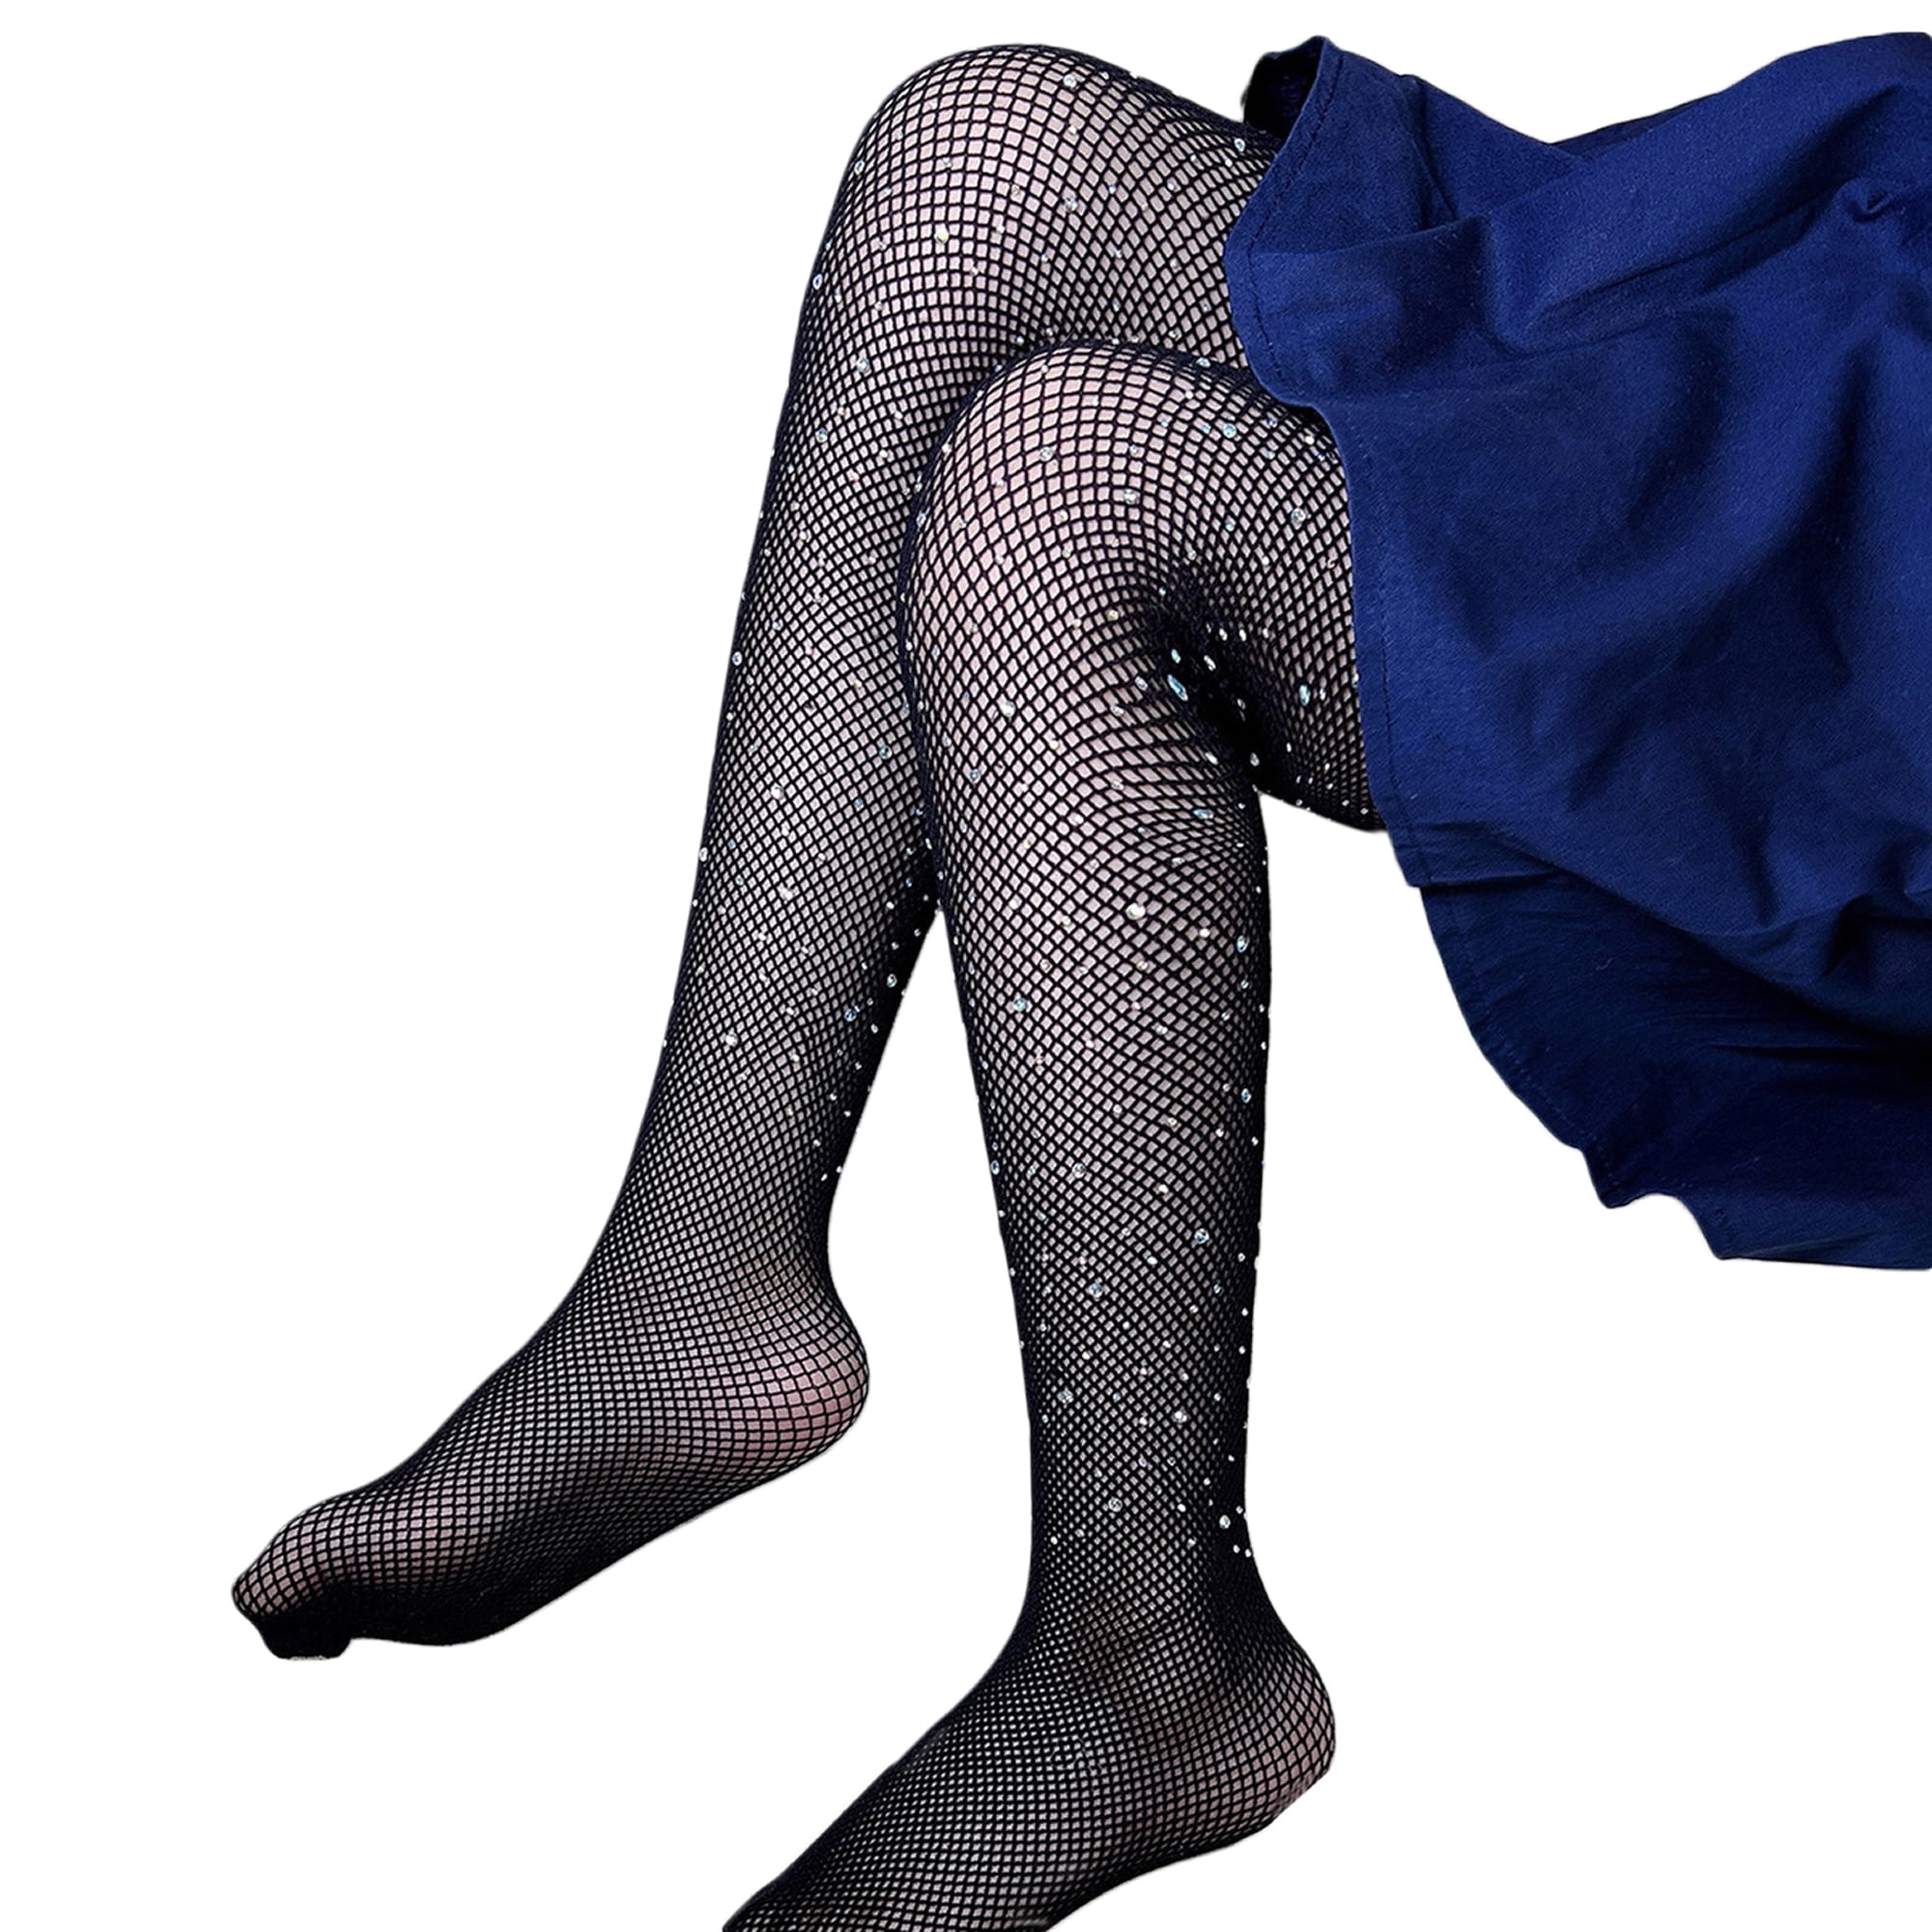 Sprifallbaby Kids Toddler Girls Fishnet Tights Glitter Rhinestone Pantyhose  Hollow Out Stockings for Dress Daily Wear 1-14Y